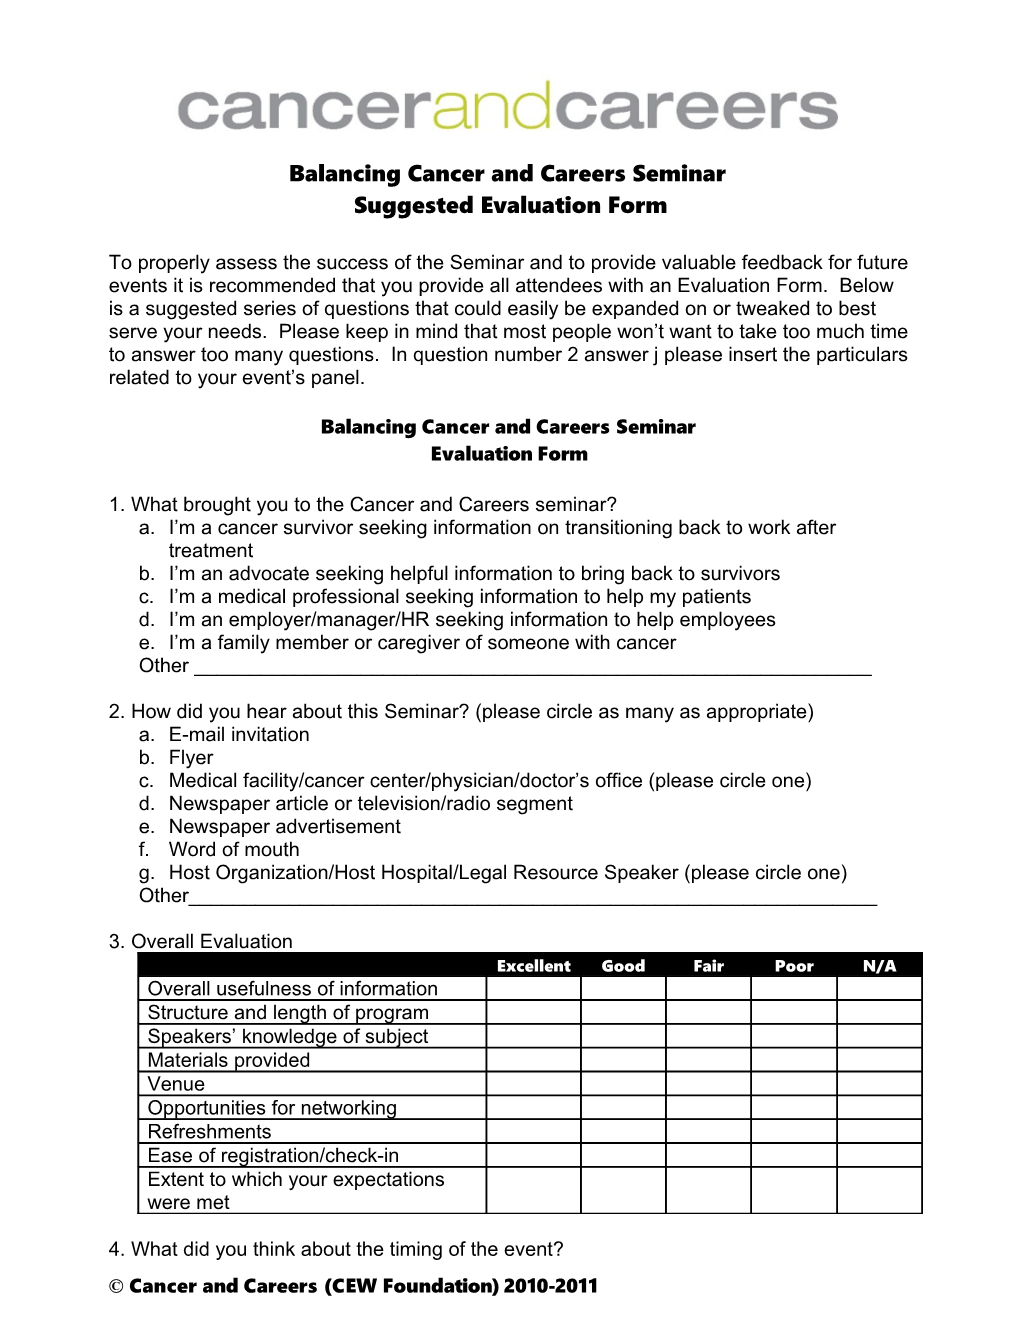 Cancer and Careers Community Seminar Evaluation Form